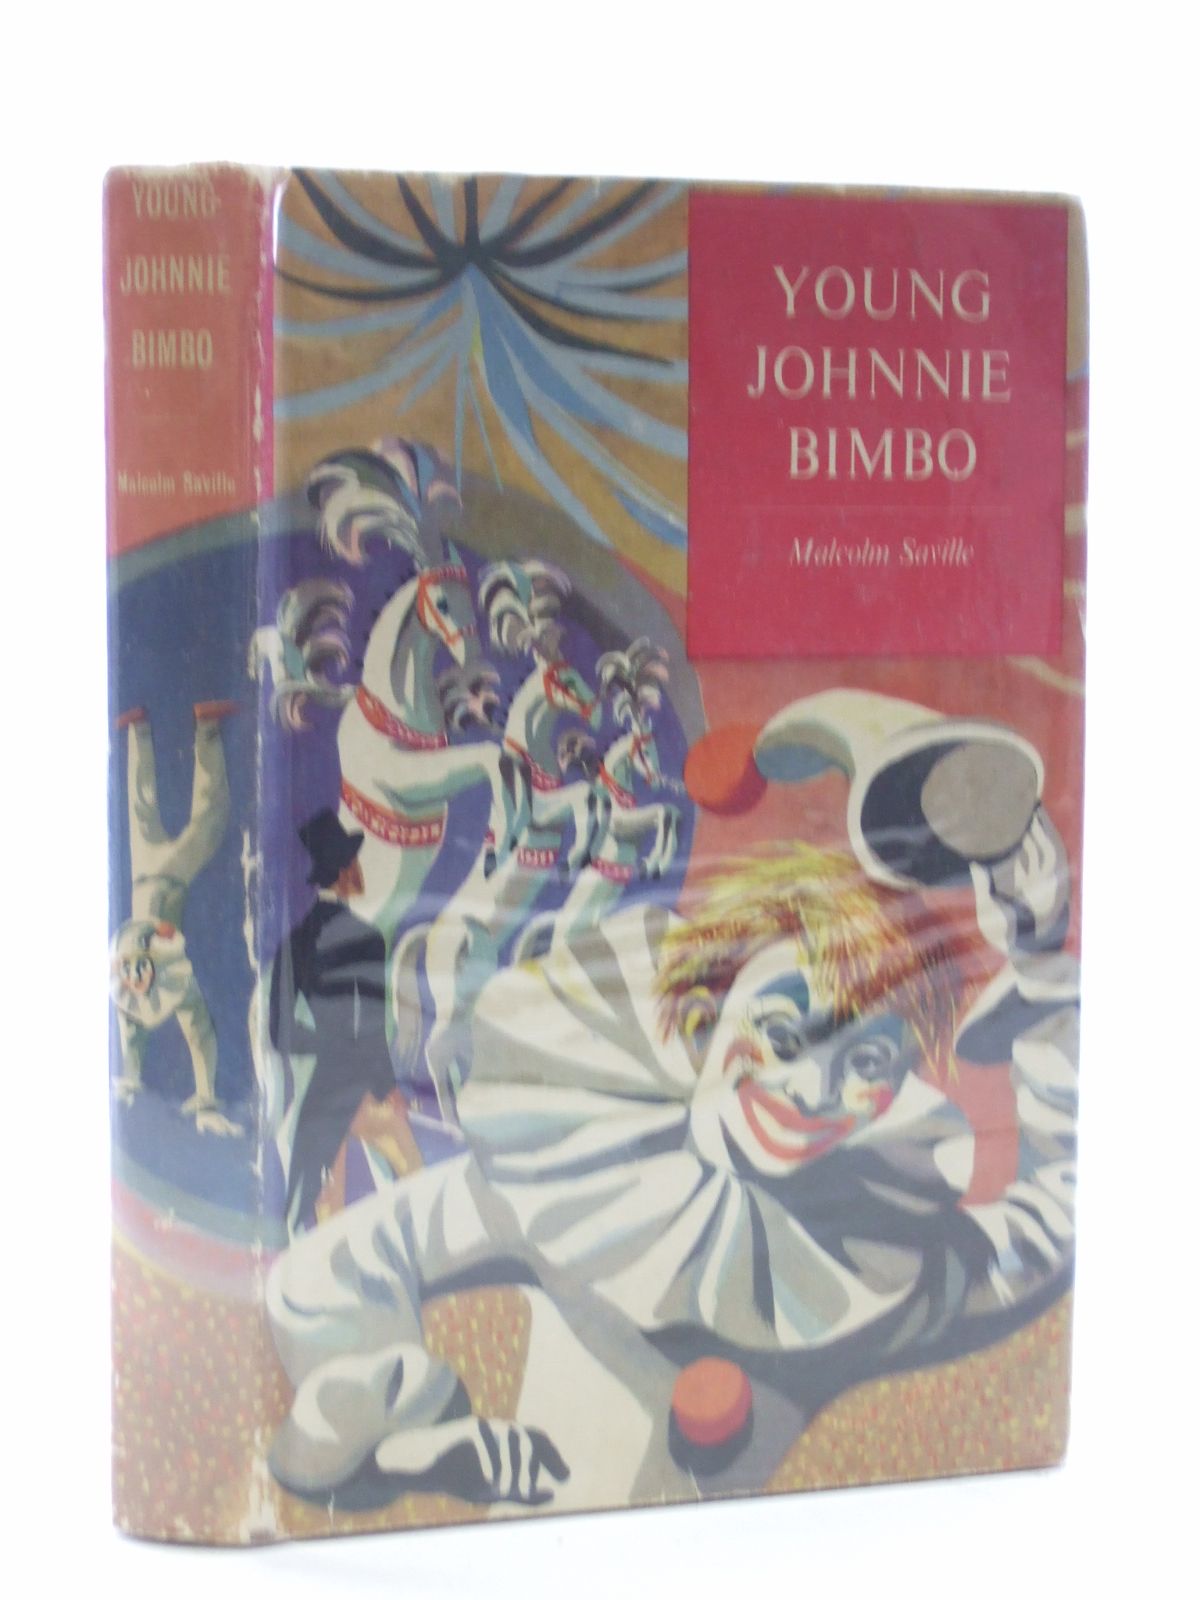 Cover of YOUNG JOHNNIE BIMBO by Malcolm Saville